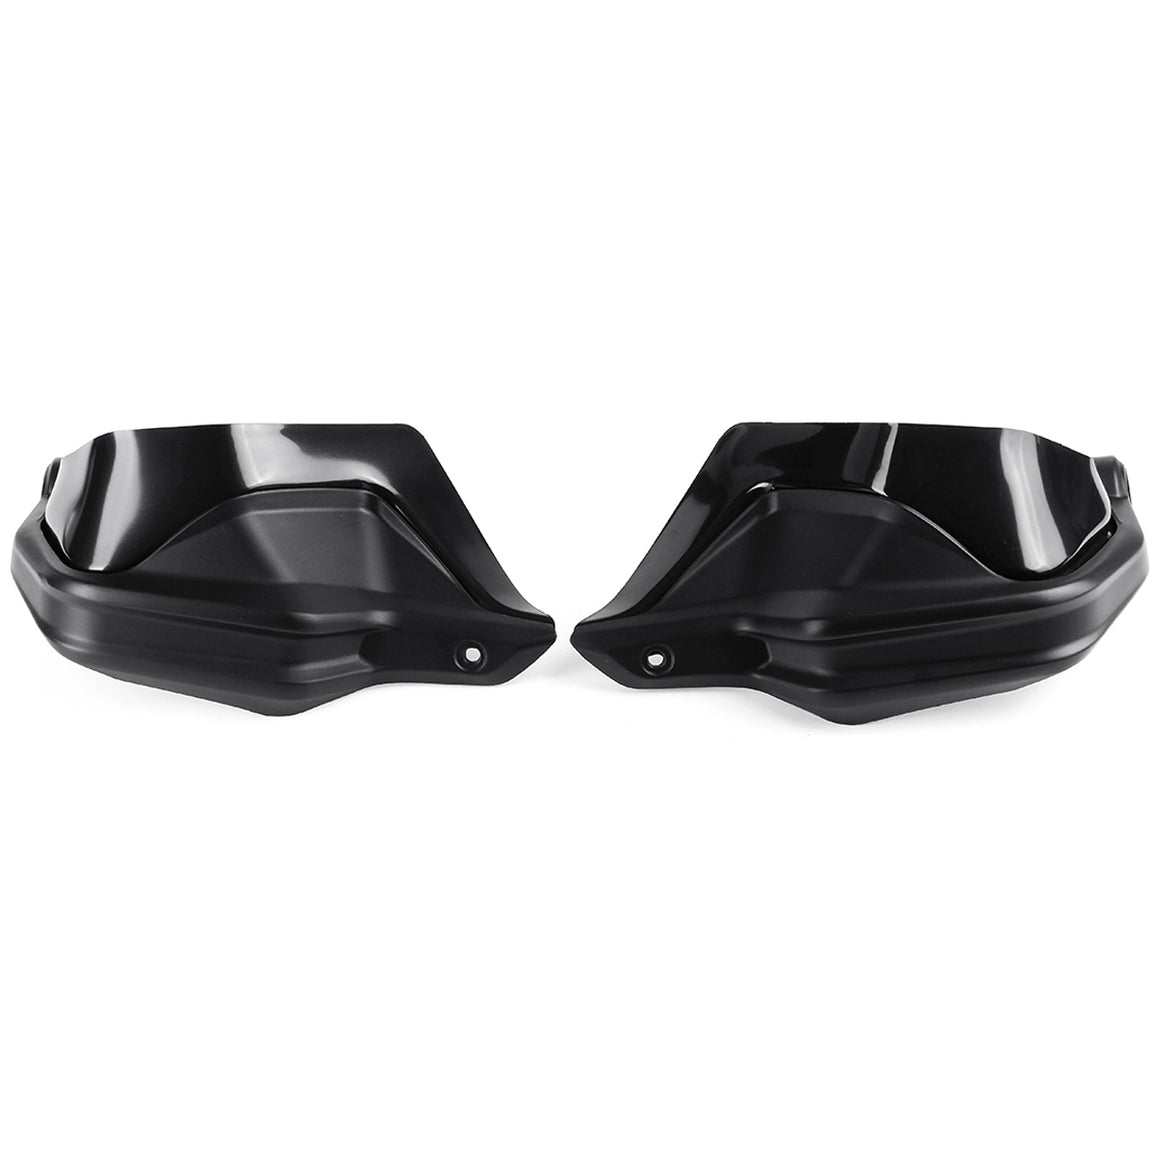 Handlebar Handguard Extension Shield Protector For BMW R1200GS F800GS ...